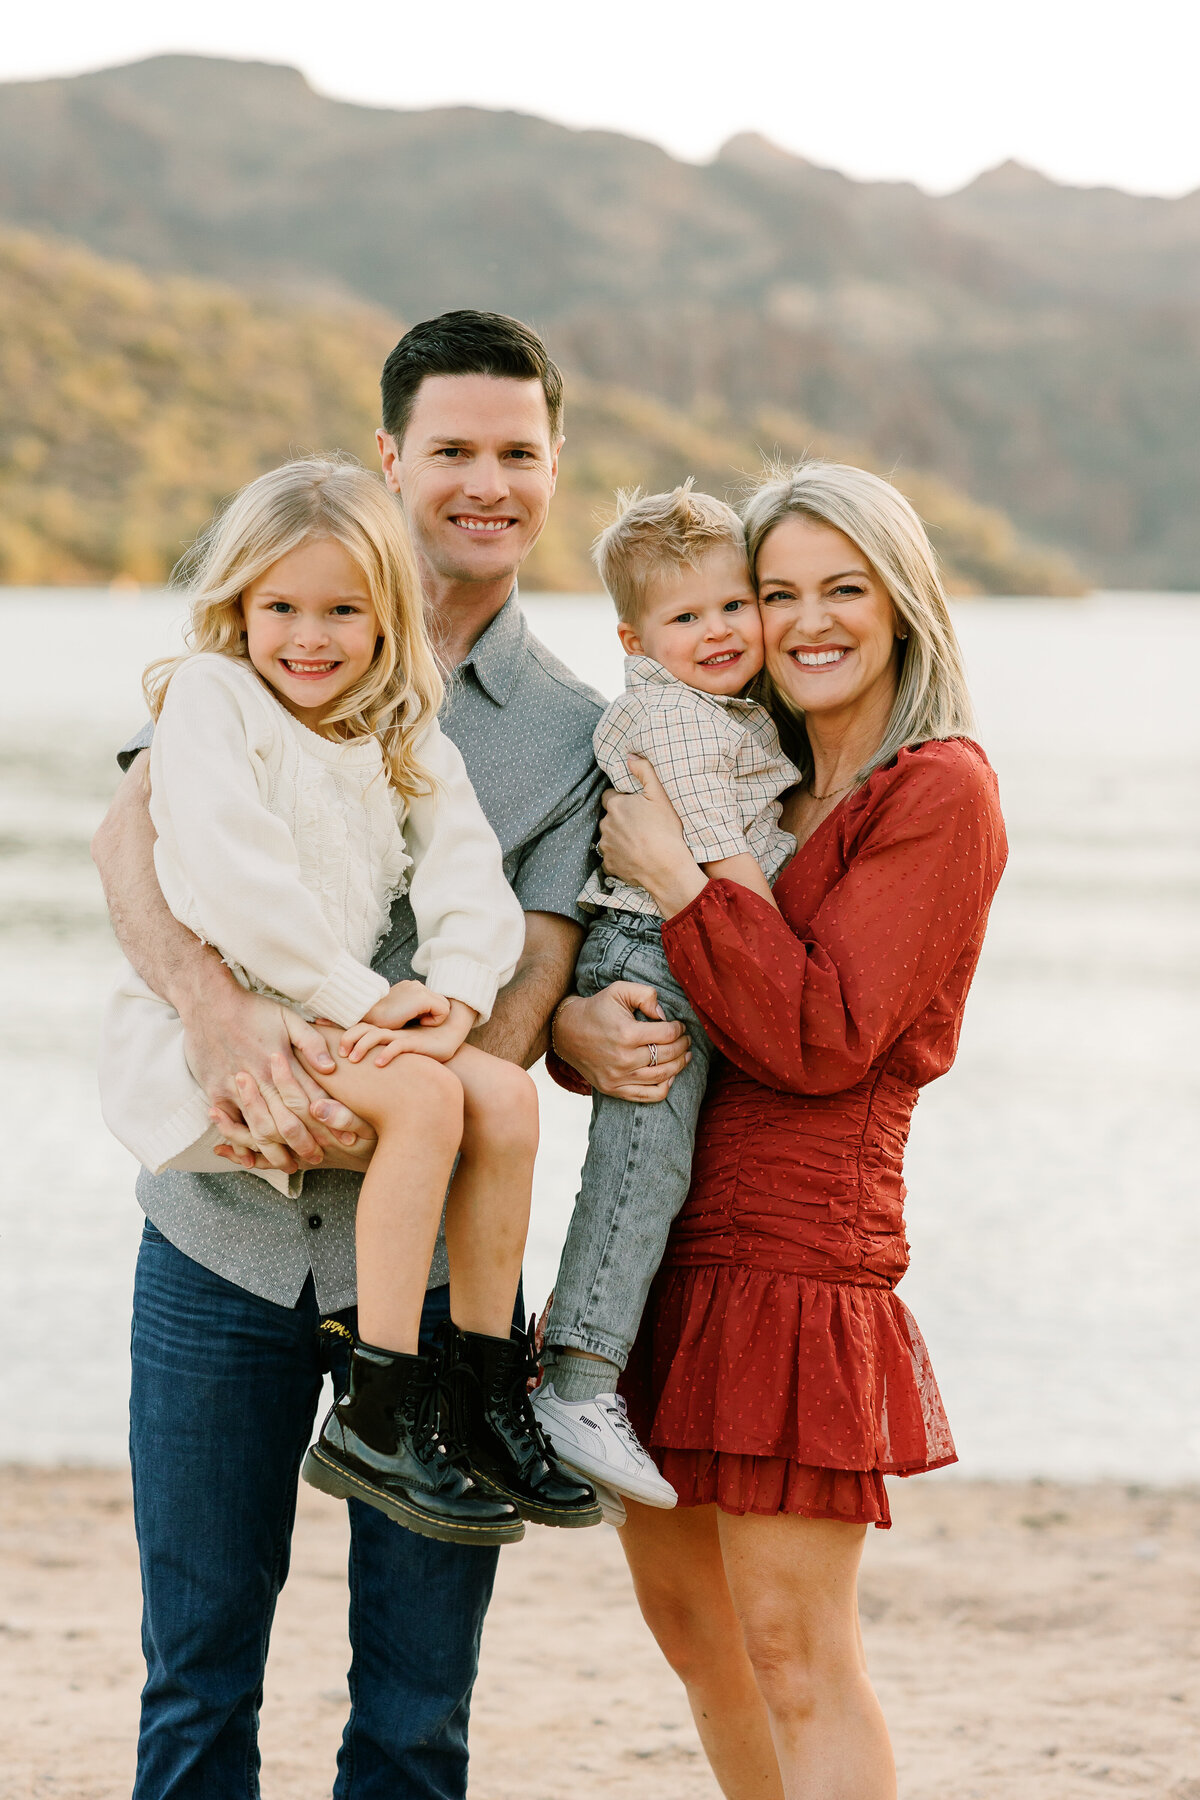 Jaclyn Castellanos specializes in Family Sessions in Phoenix, Chandler, Mesa, Gilbert,Arizona